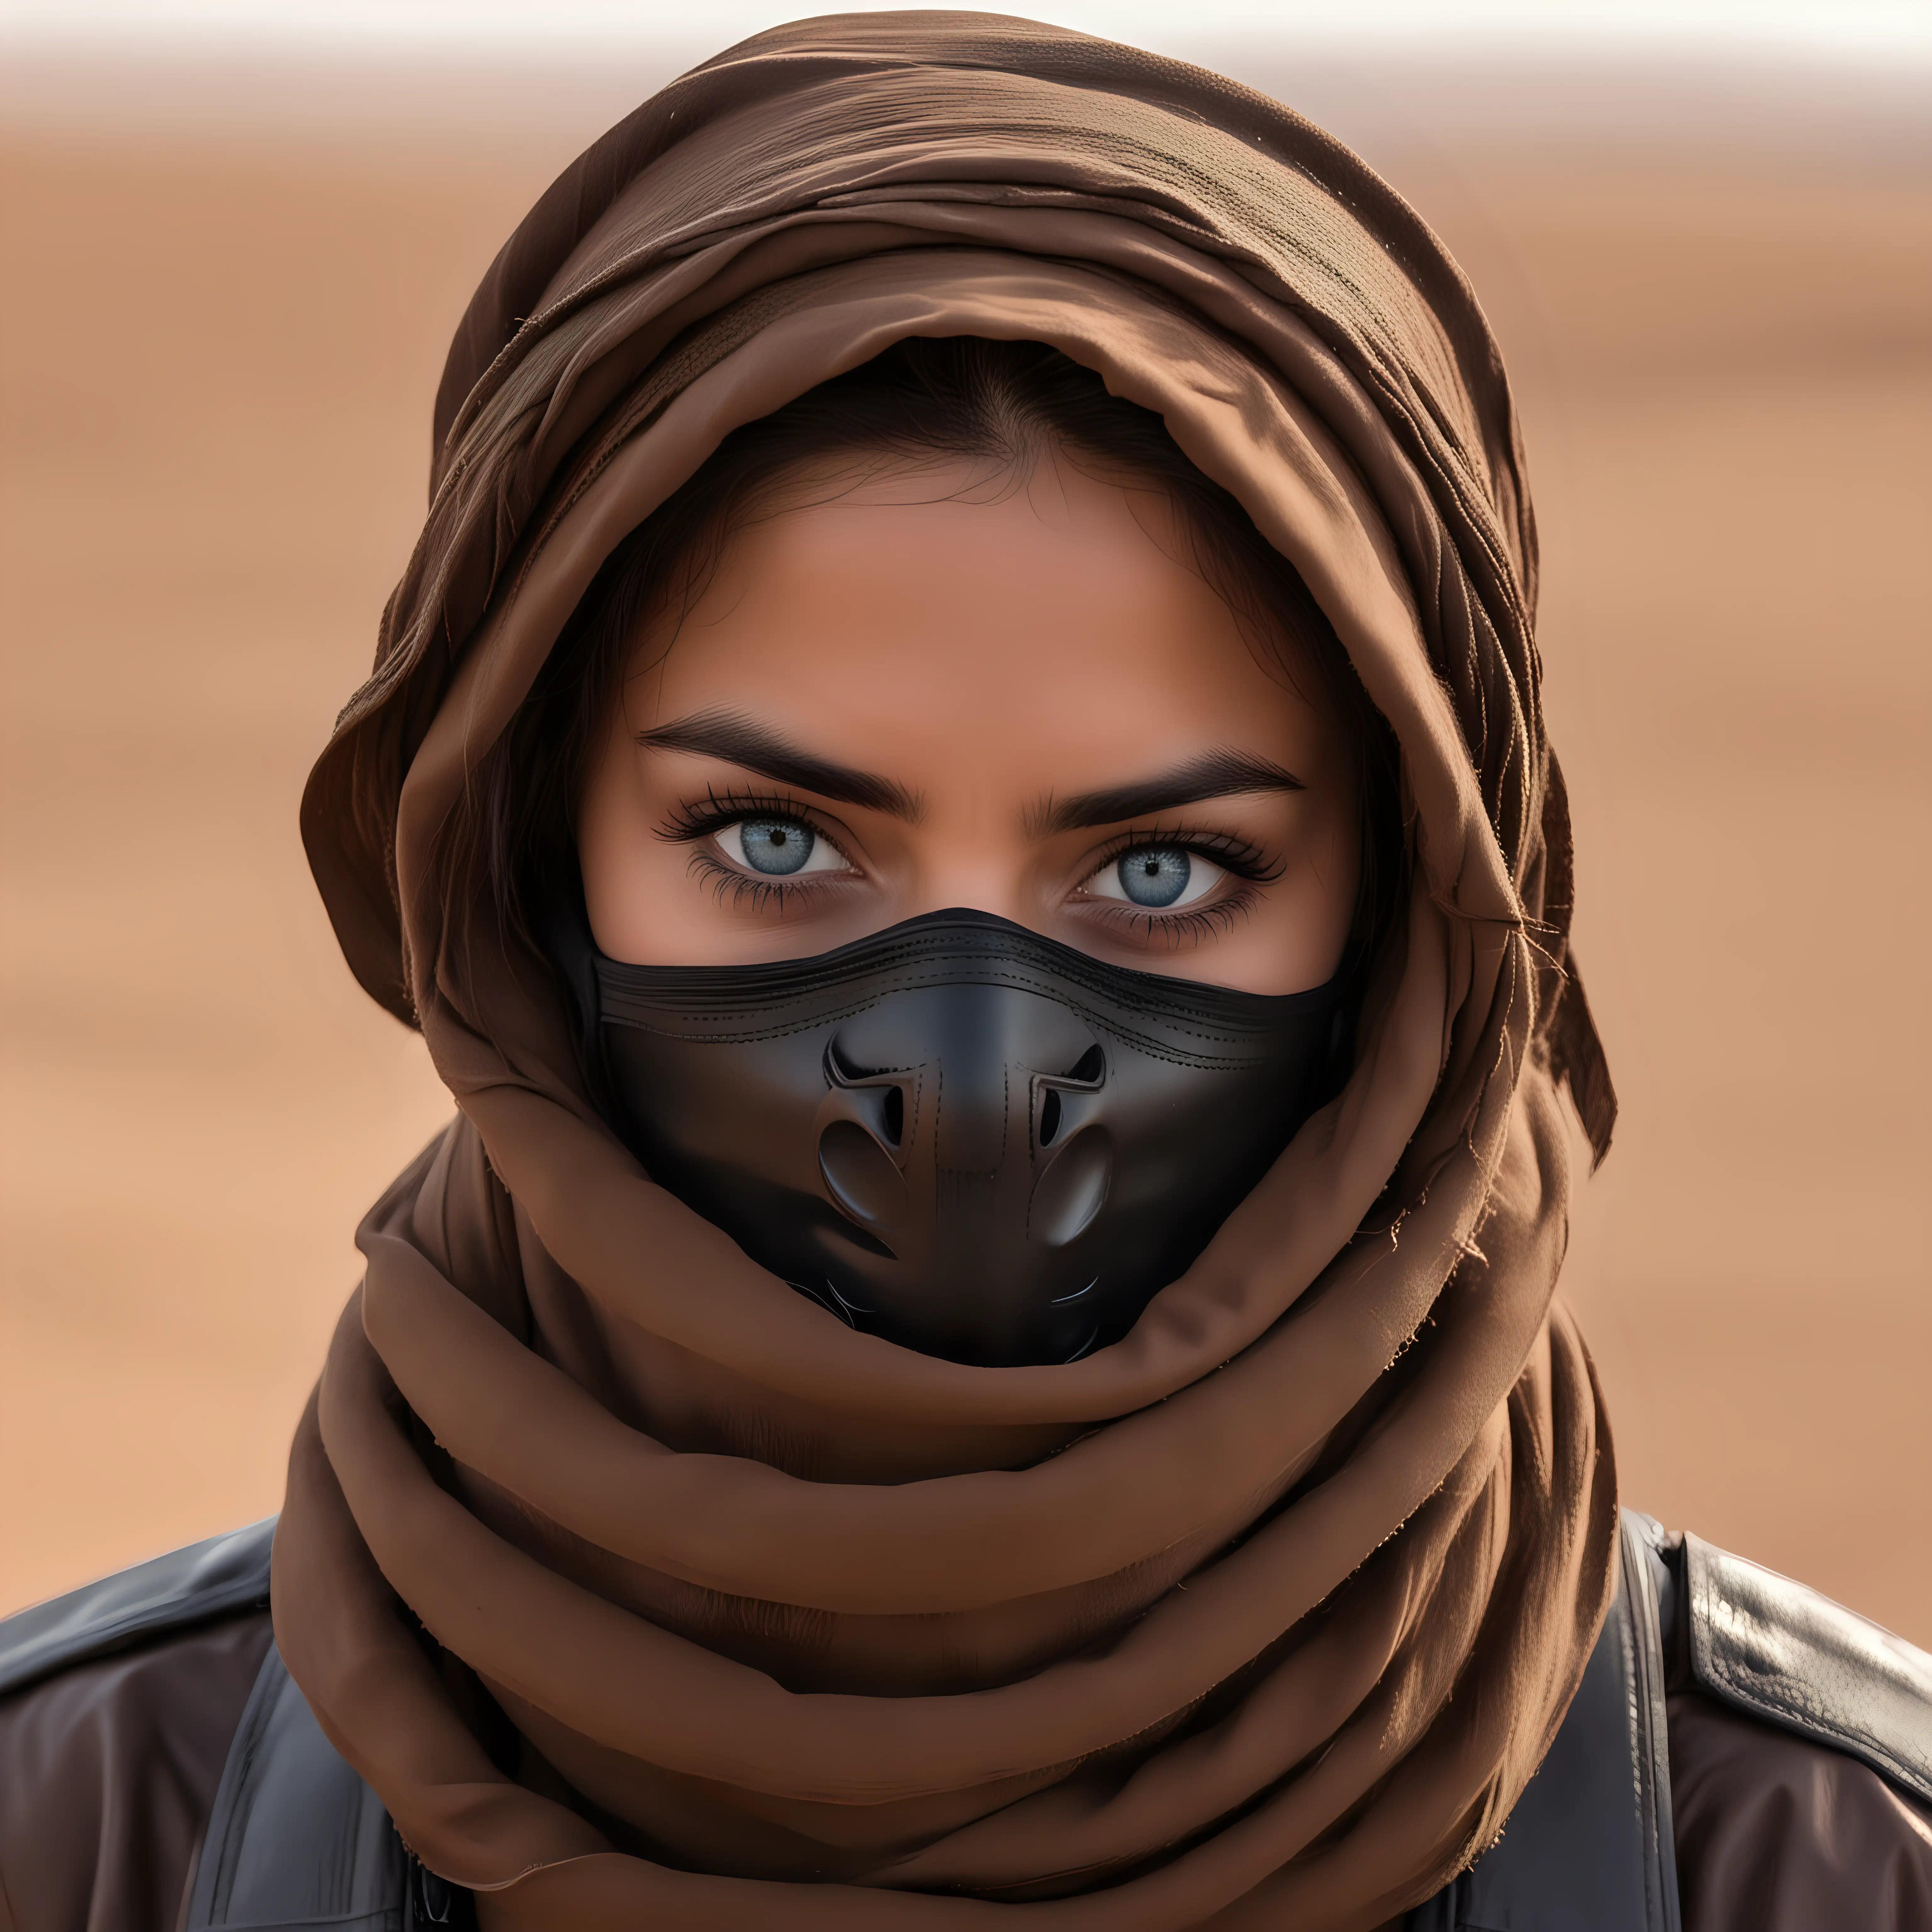 DarkSkinned Woman in Brown Leather and DuneStyle Mask with Desert Landscape